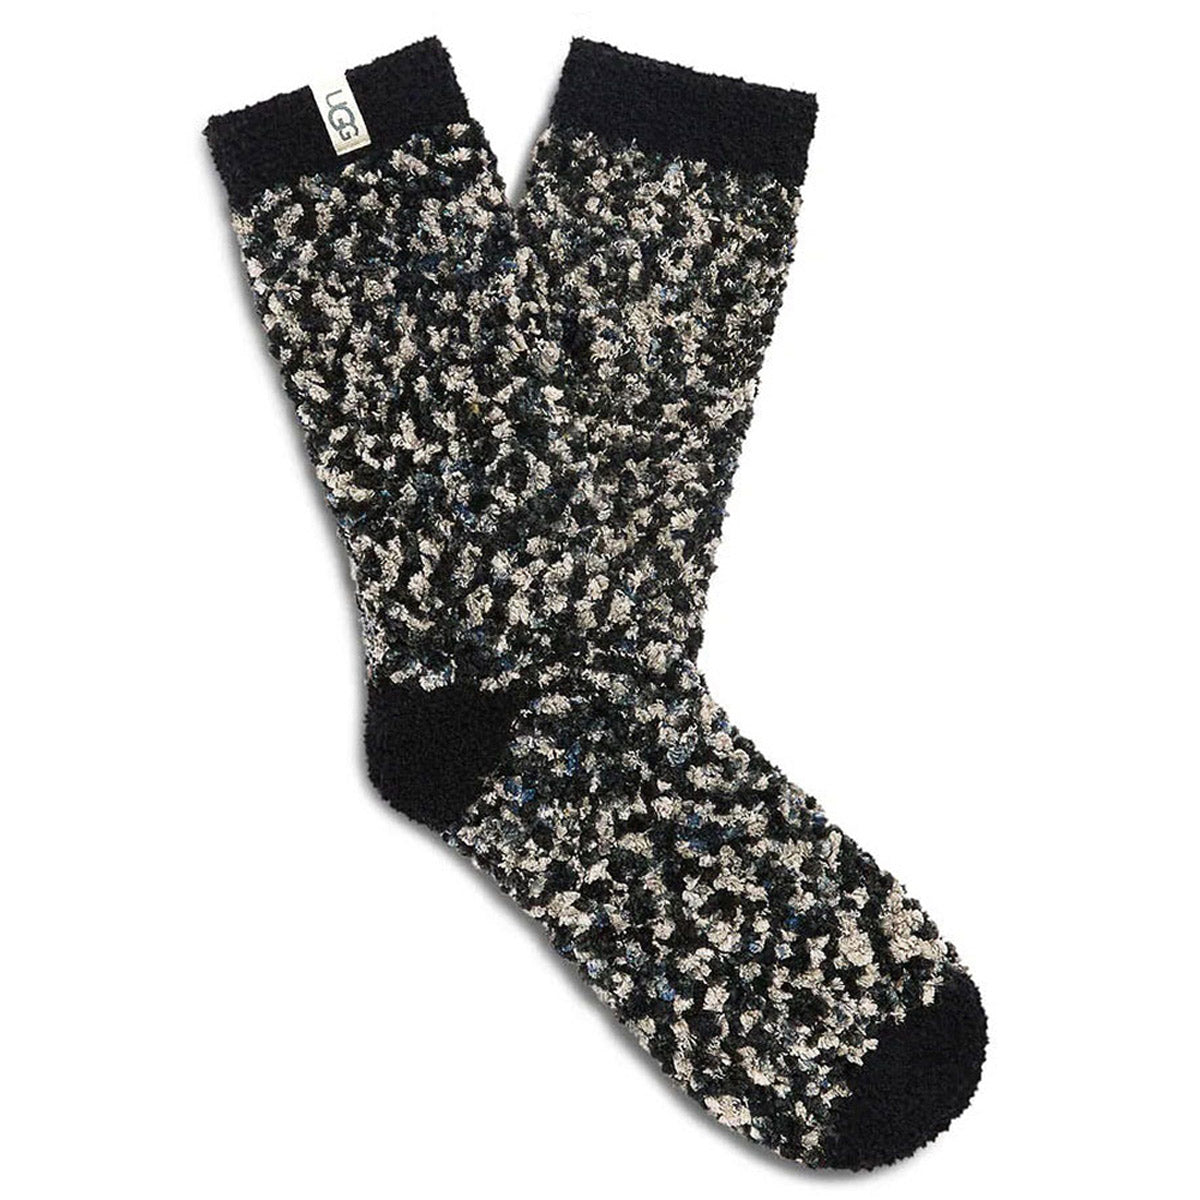 A single pair of patterned, fuzzy UGG Cozy Chenille Sock for women.